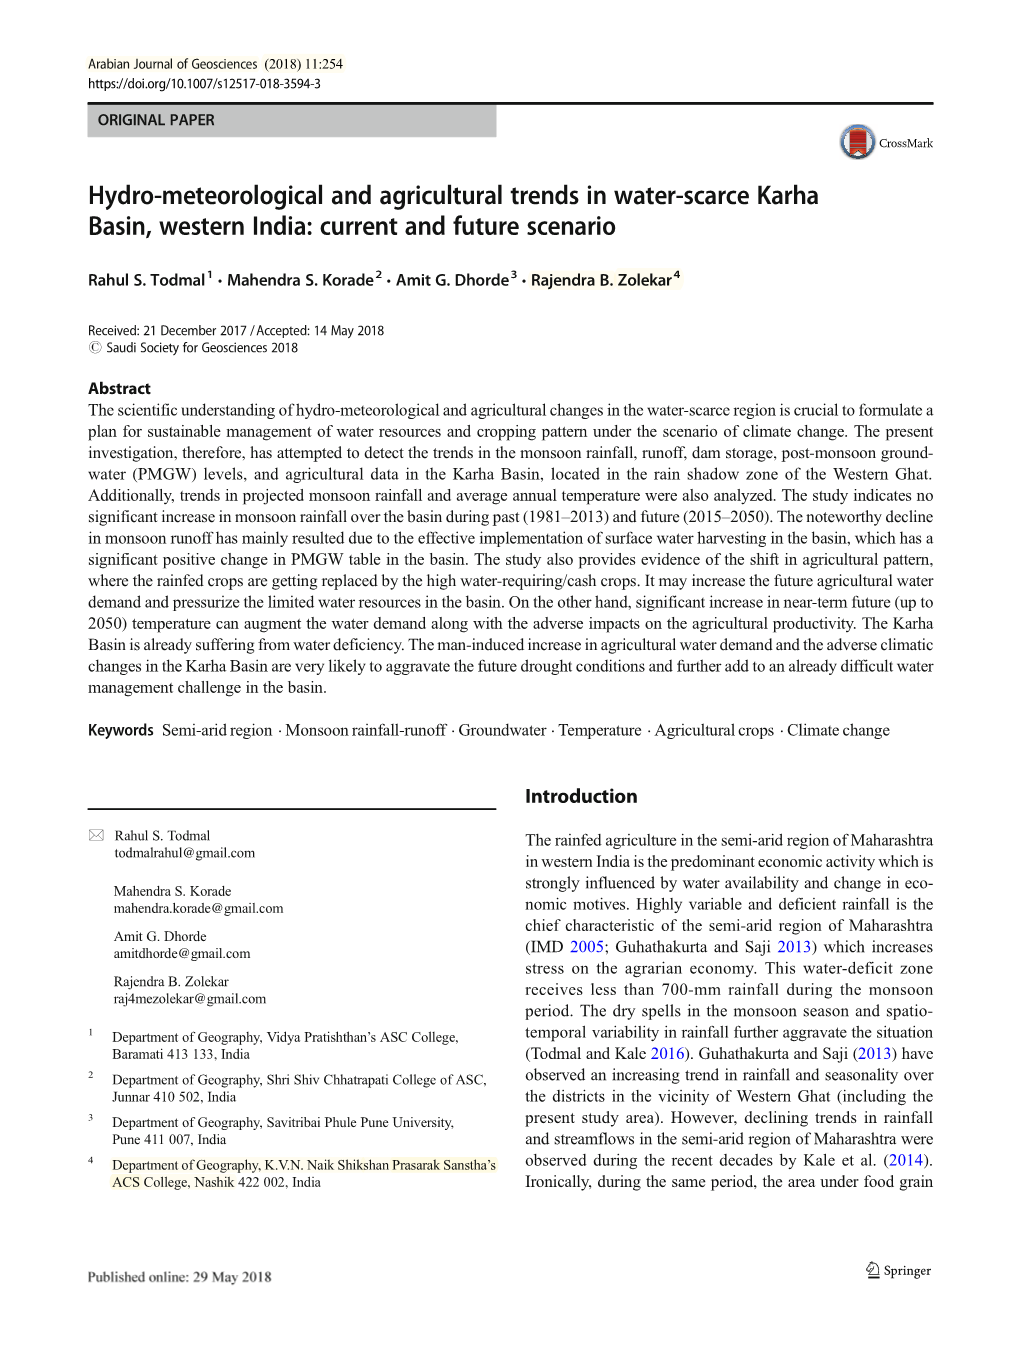 Hydro-Meteorological and Agricultural Trends in Water-Scarce Karha Basin, Western India: Current and Future Scenario